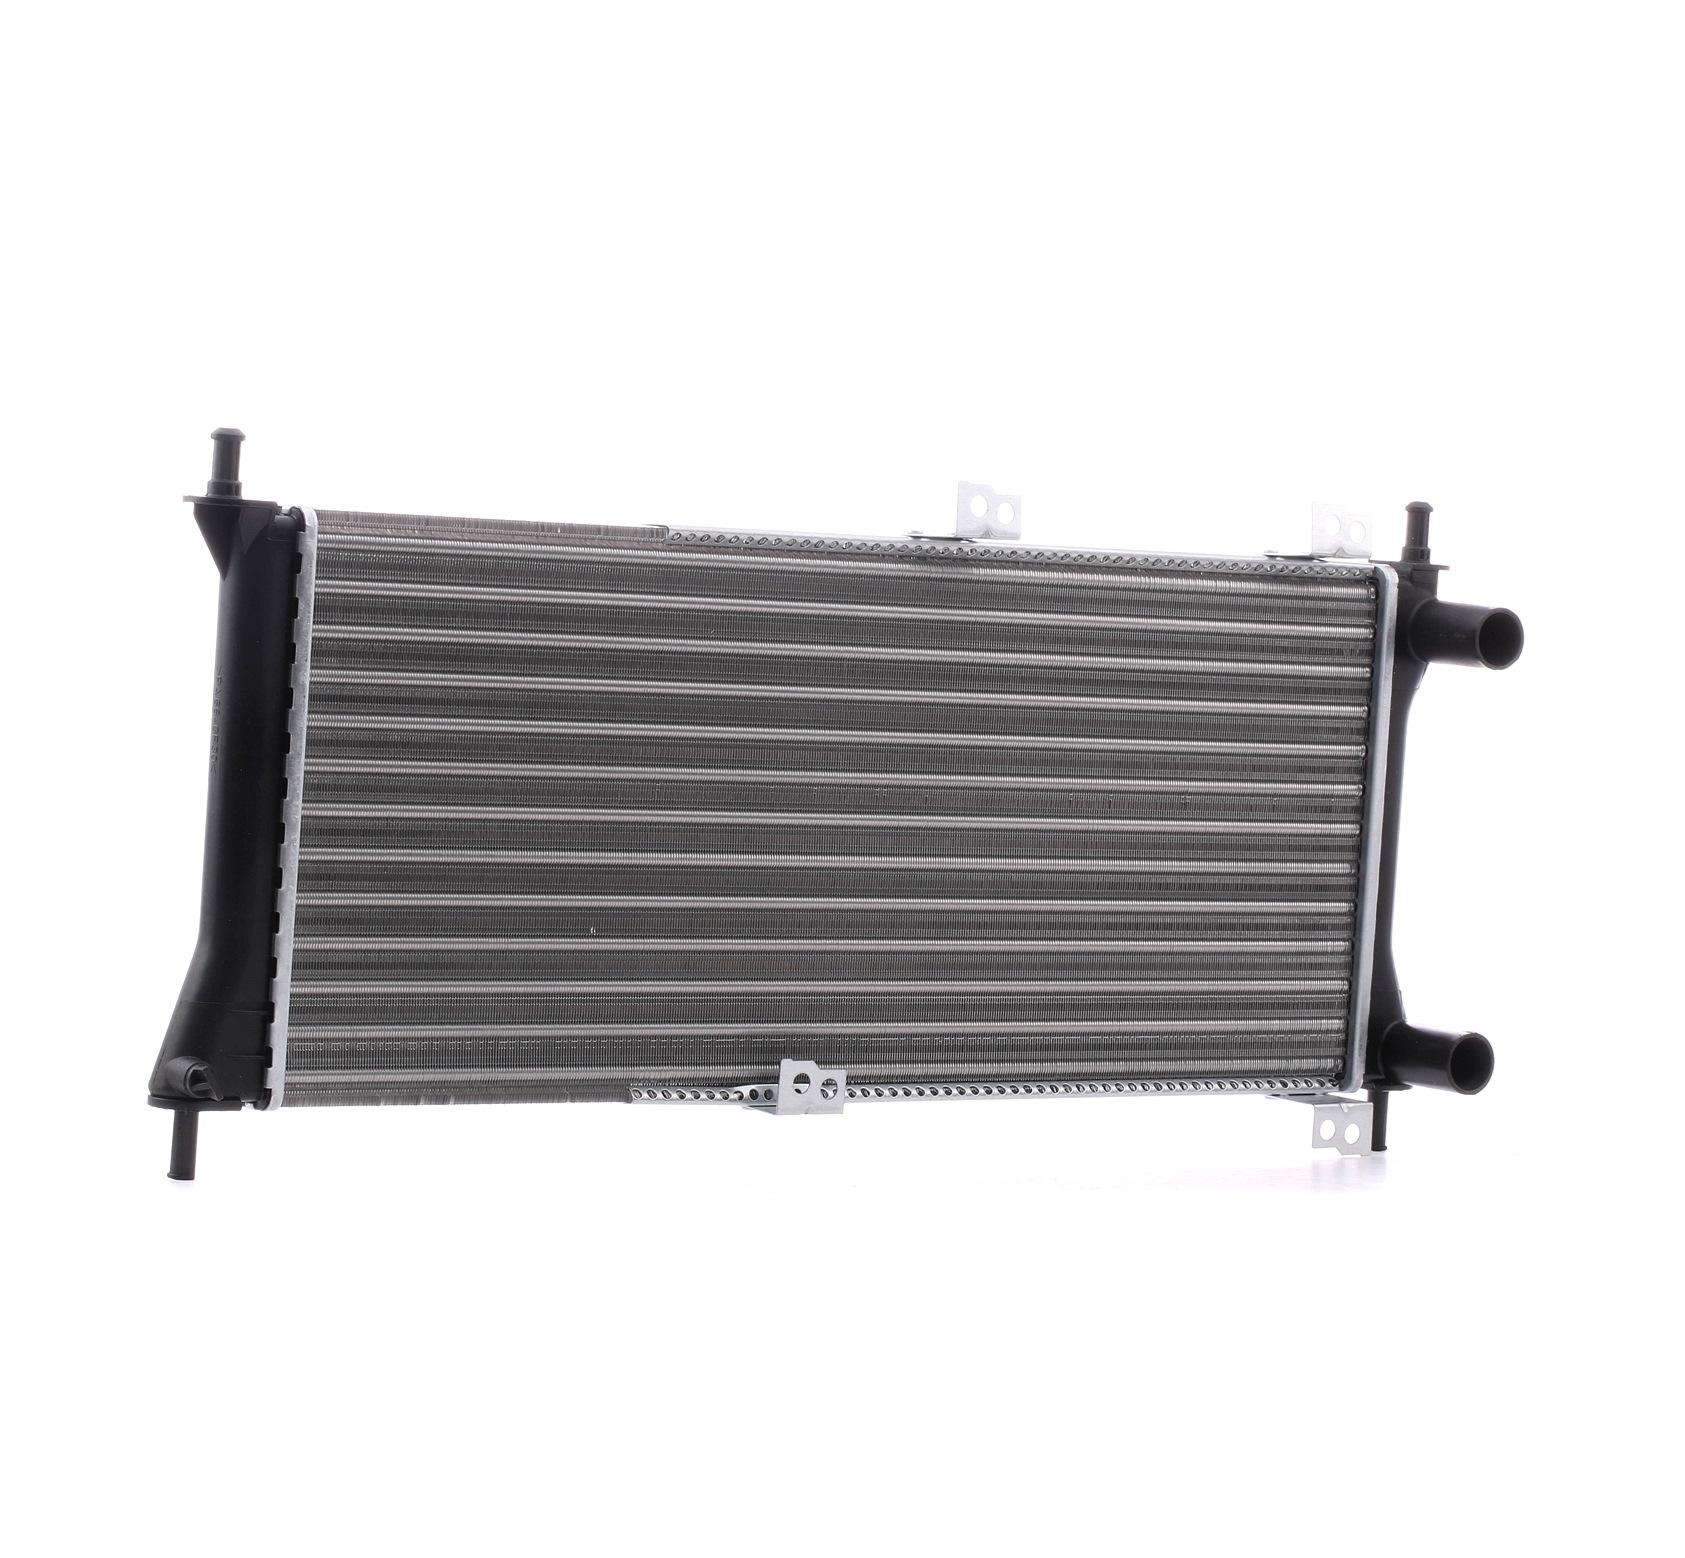 STARK SKRD-0120345 Engine radiator Aluminium, Plastic, for vehicles without air conditioning, Manual Transmission